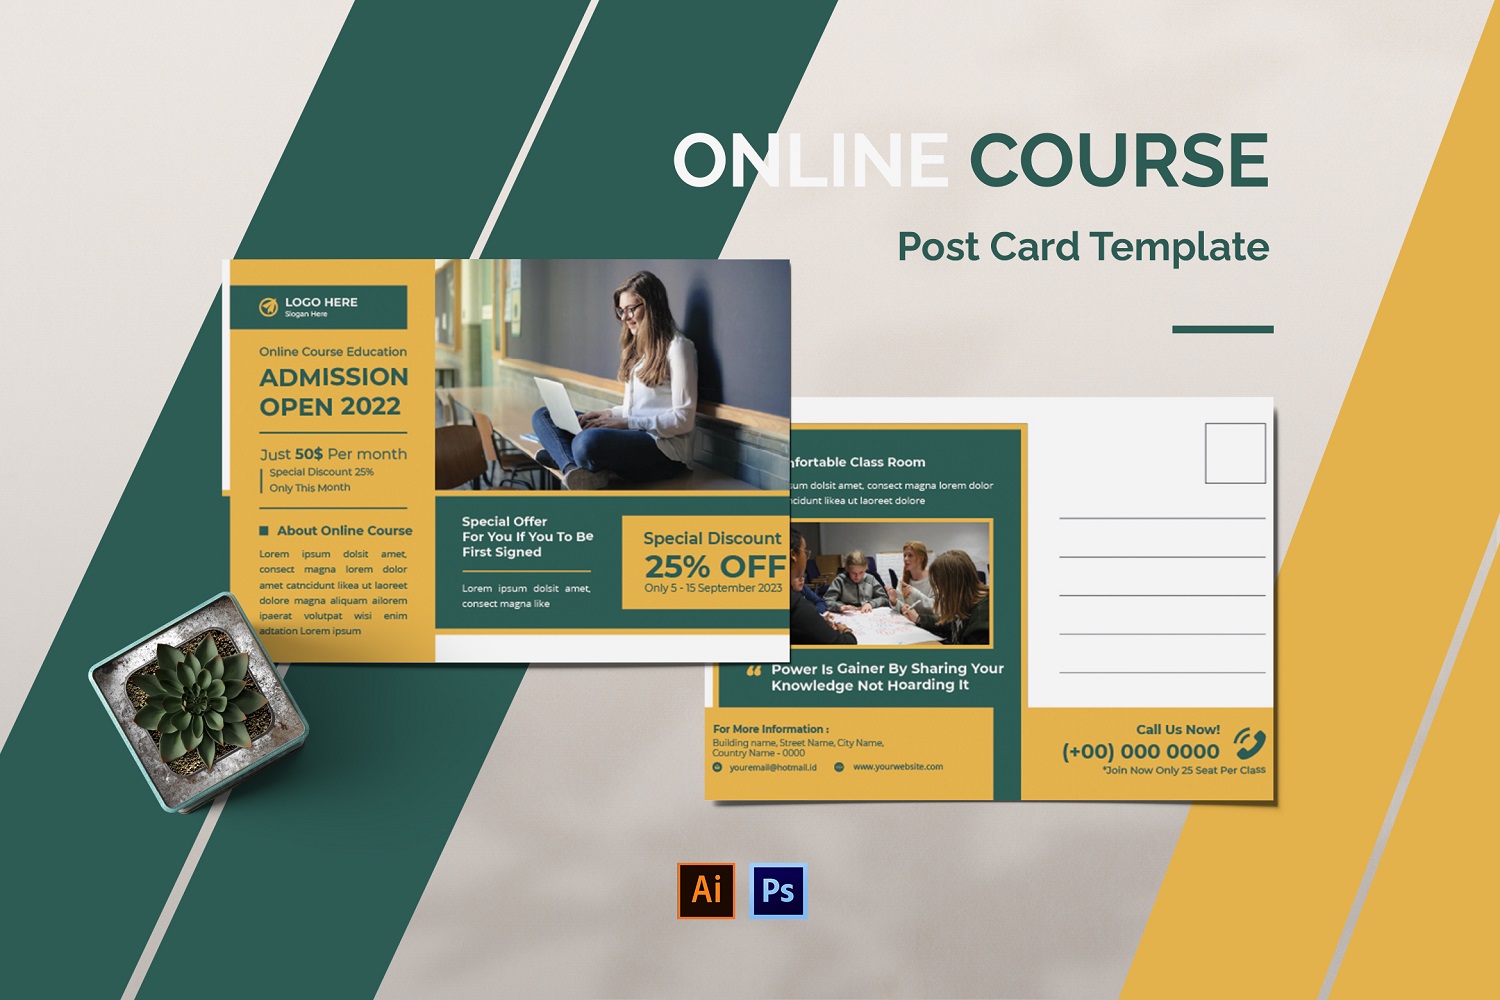 Online Course Post Card Template